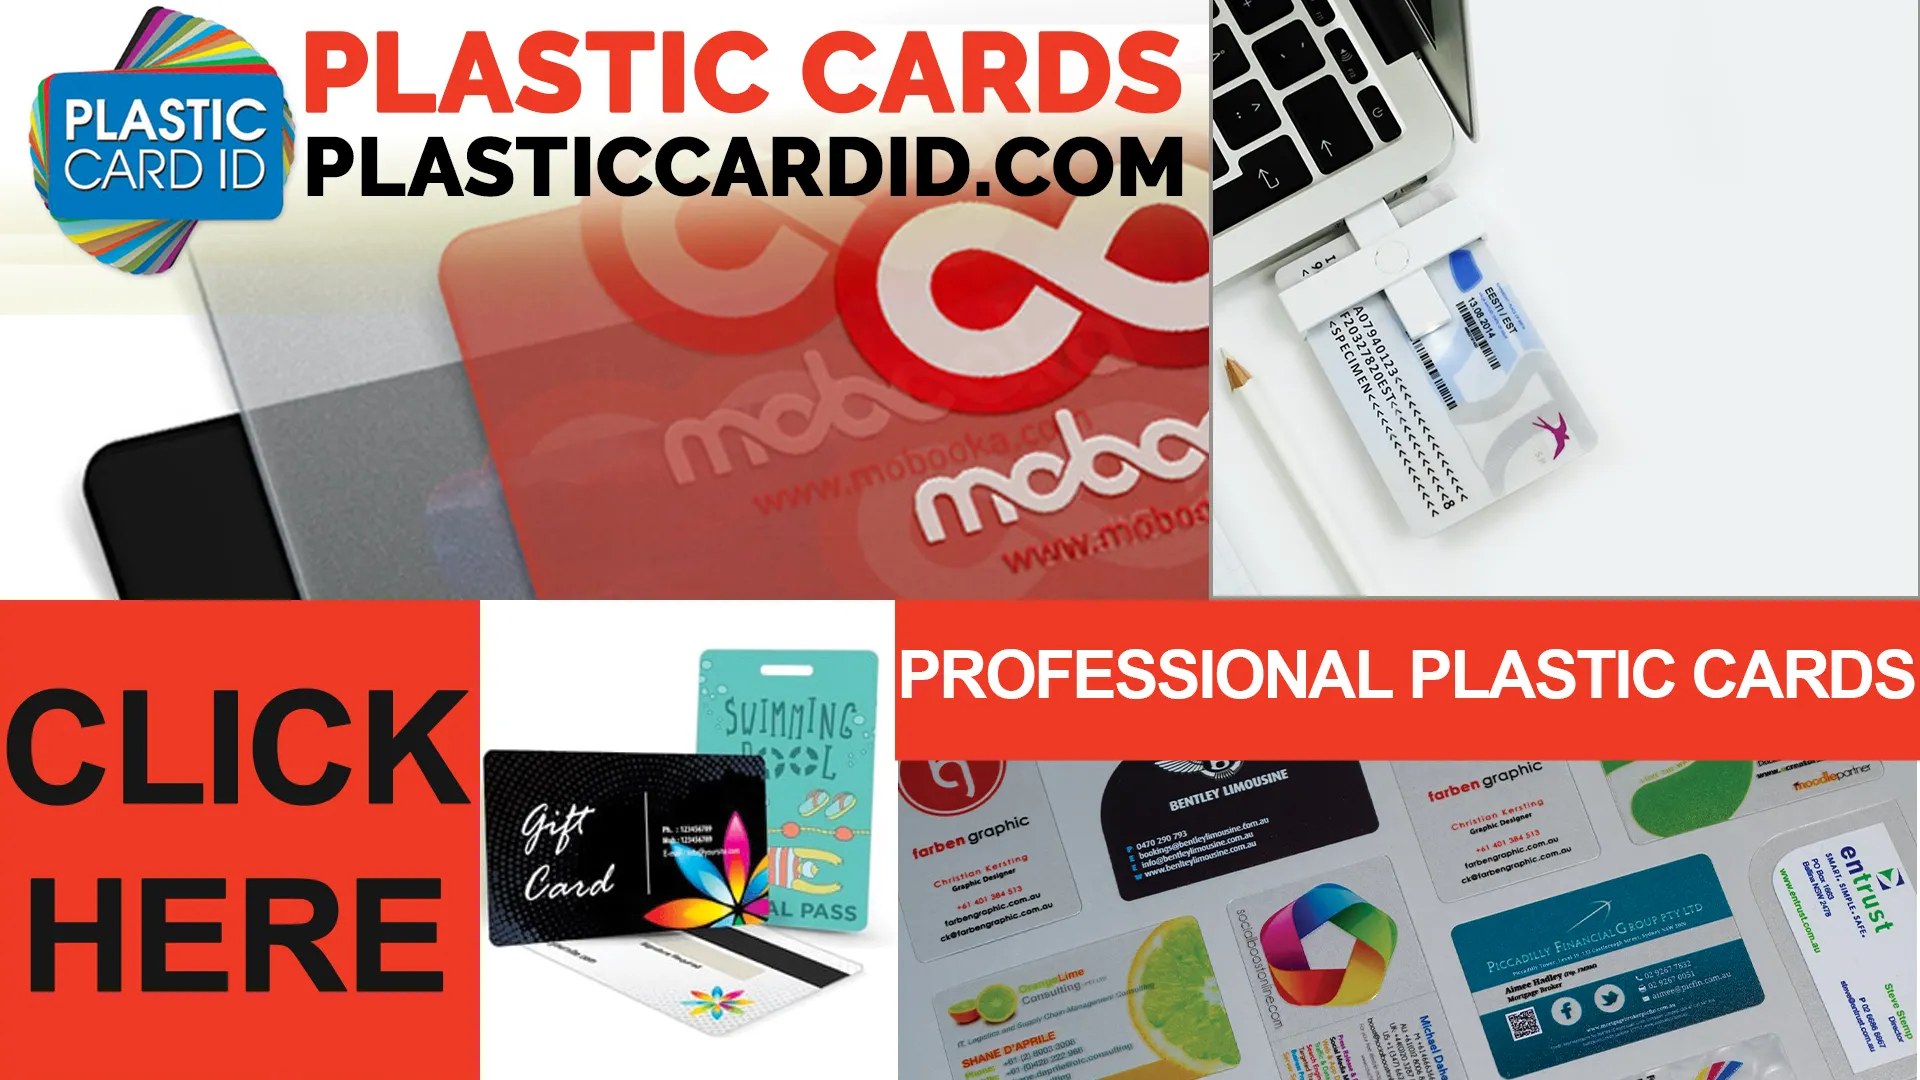 Experience the Ease of Ordering with Plastic Card ID
